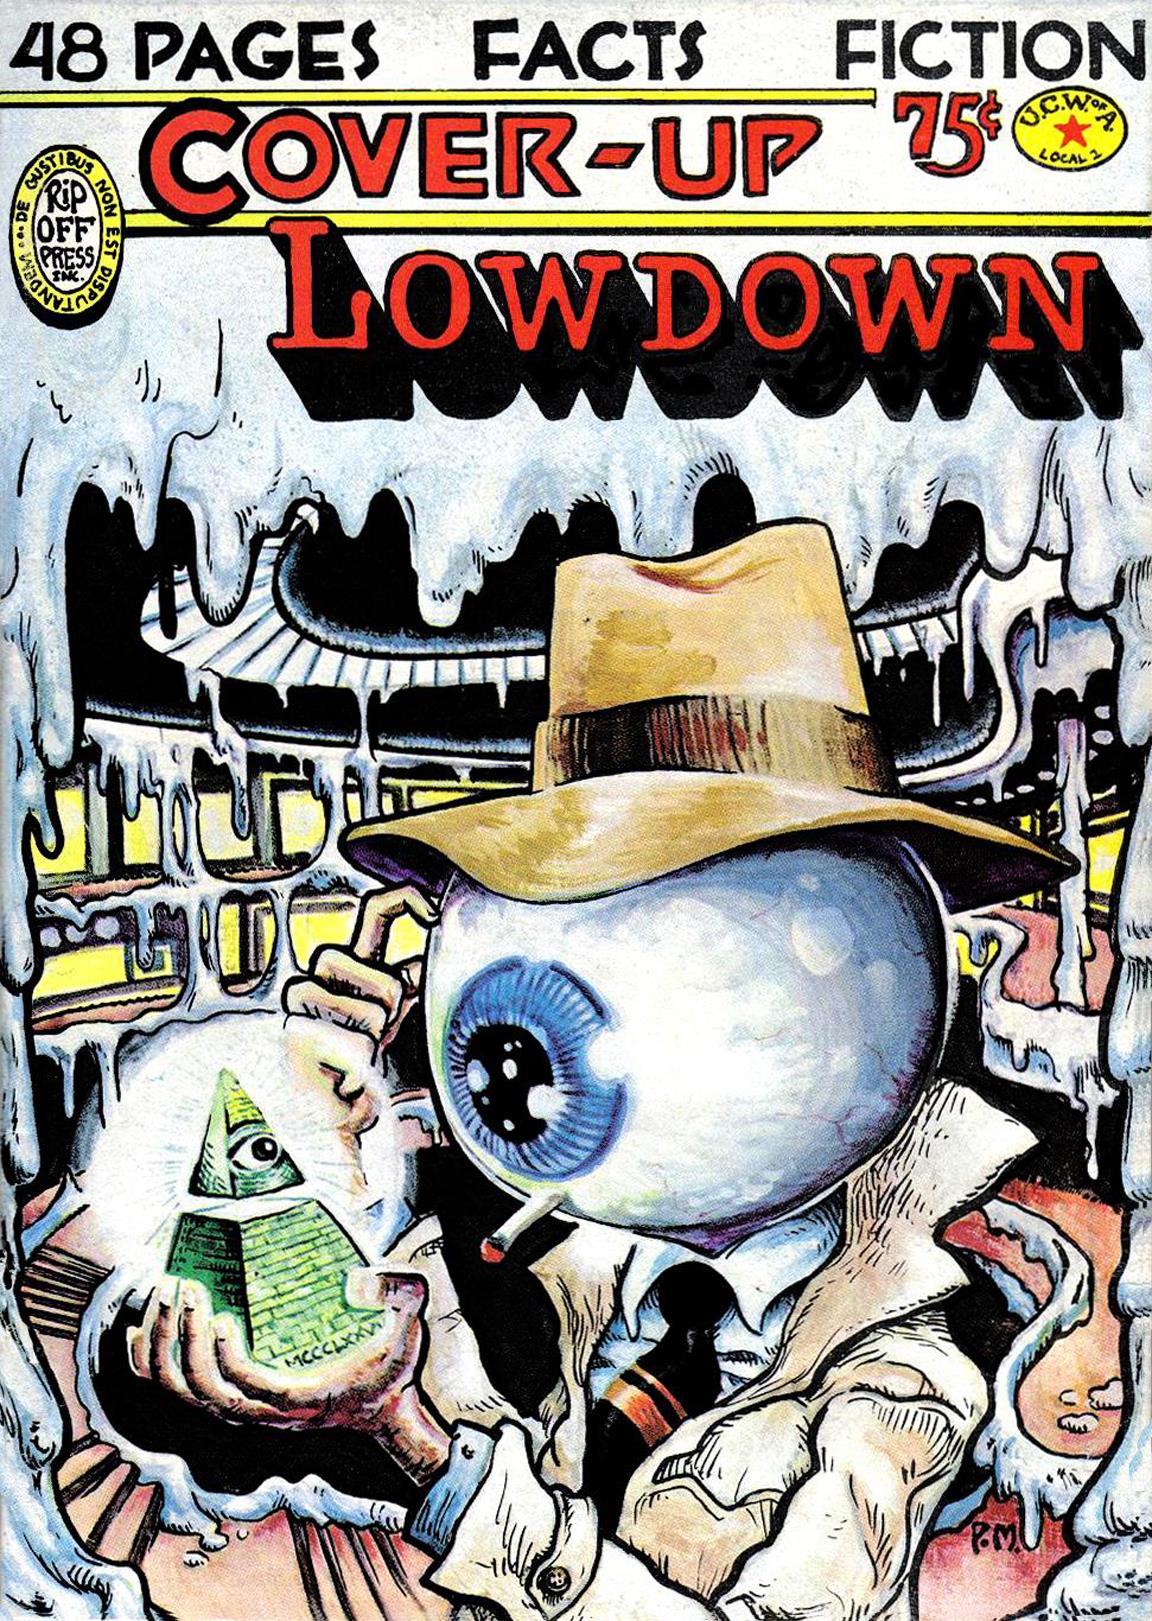 Cover-Up Lowdown (1977)